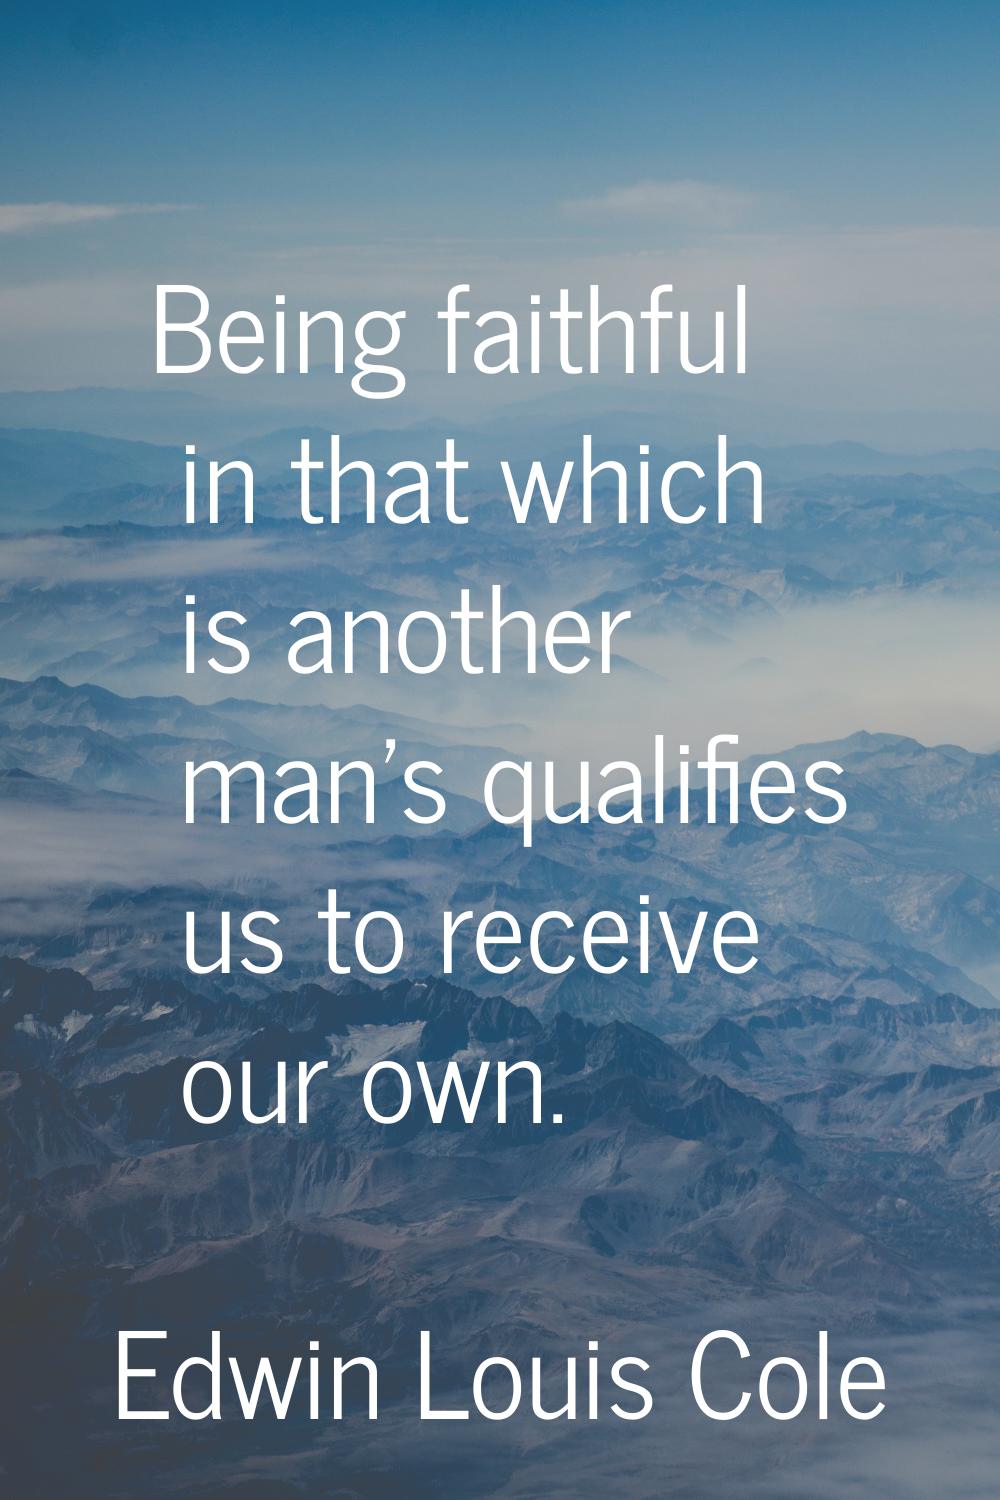 Being faithful in that which is another man's qualifies us to receive our own.